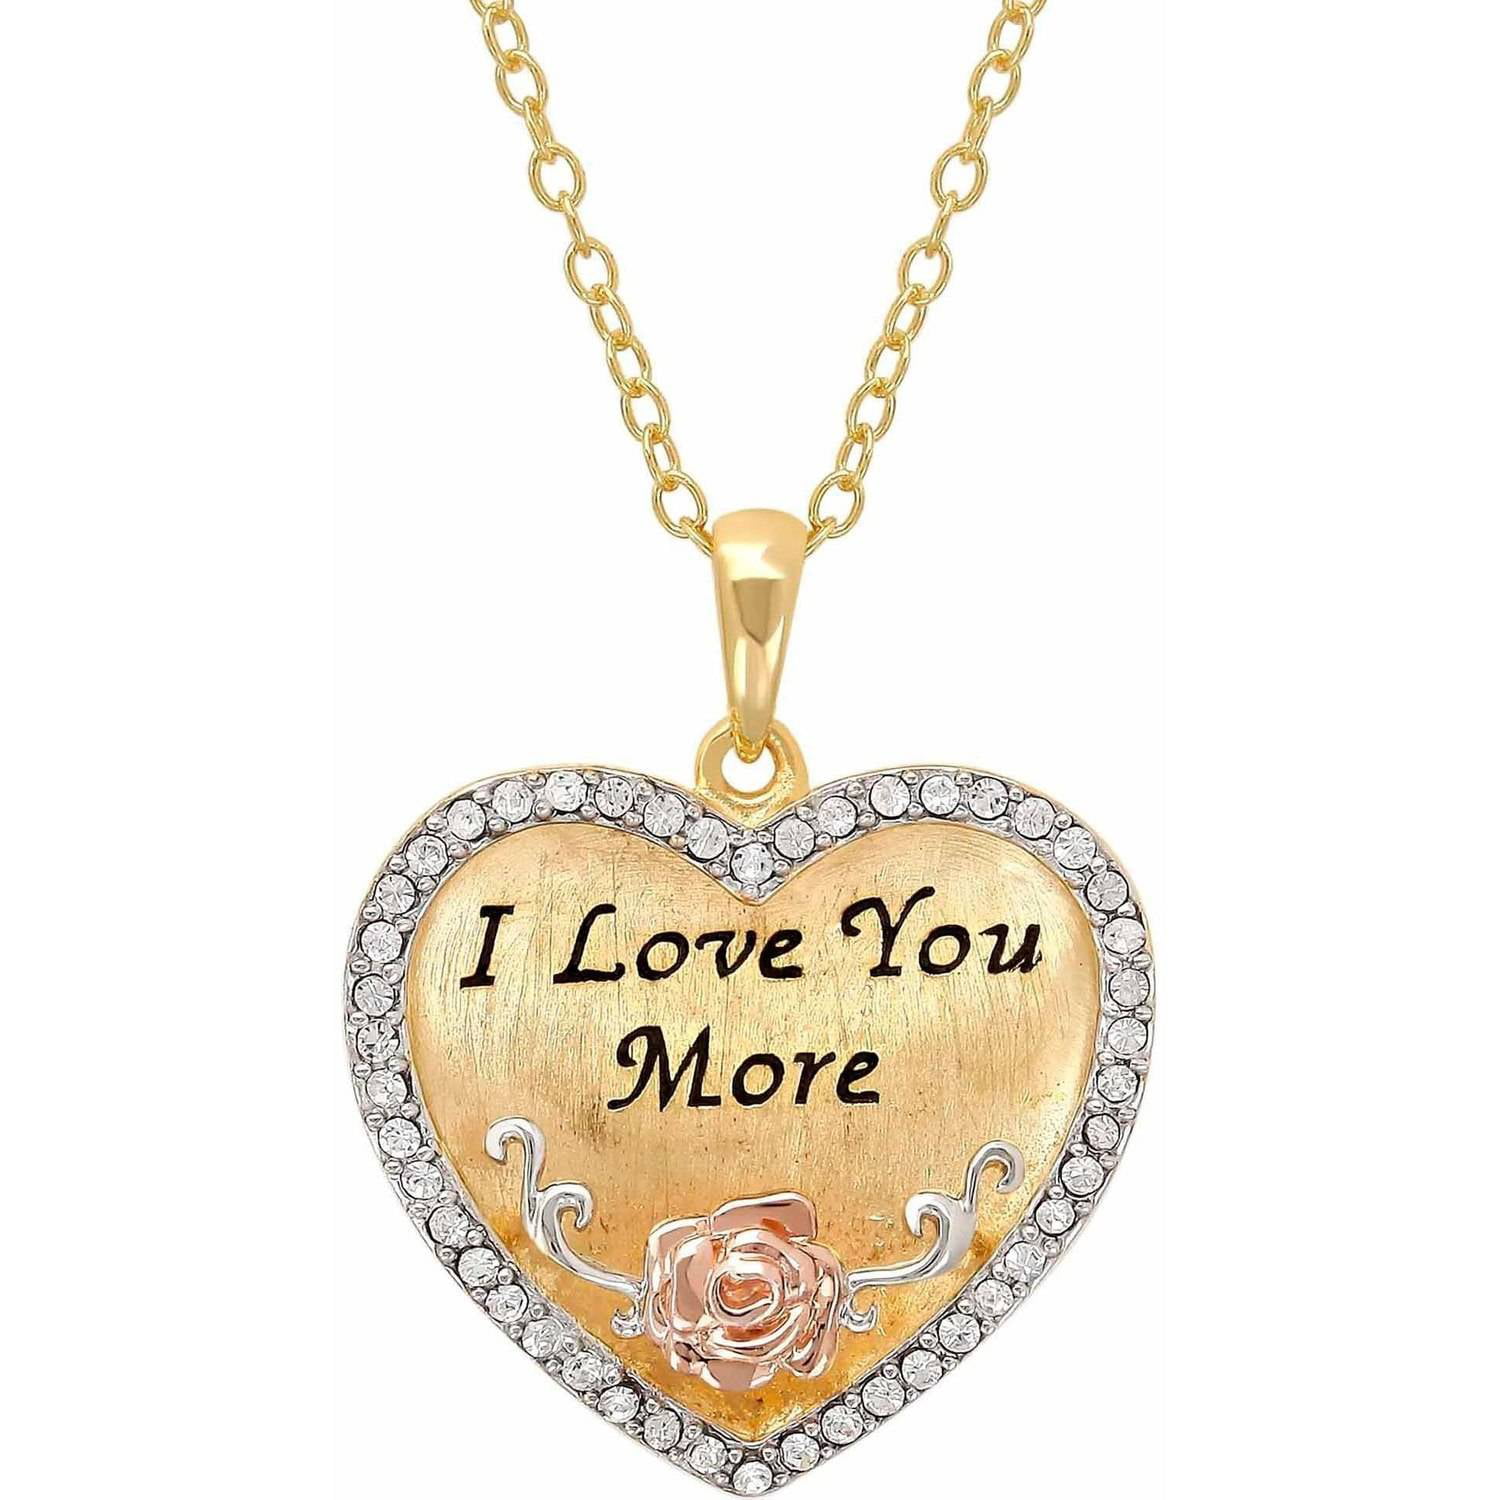 Charm 18k Gold Plated Love Heart Crystal Pendant Chain Long Necklace Jewelry